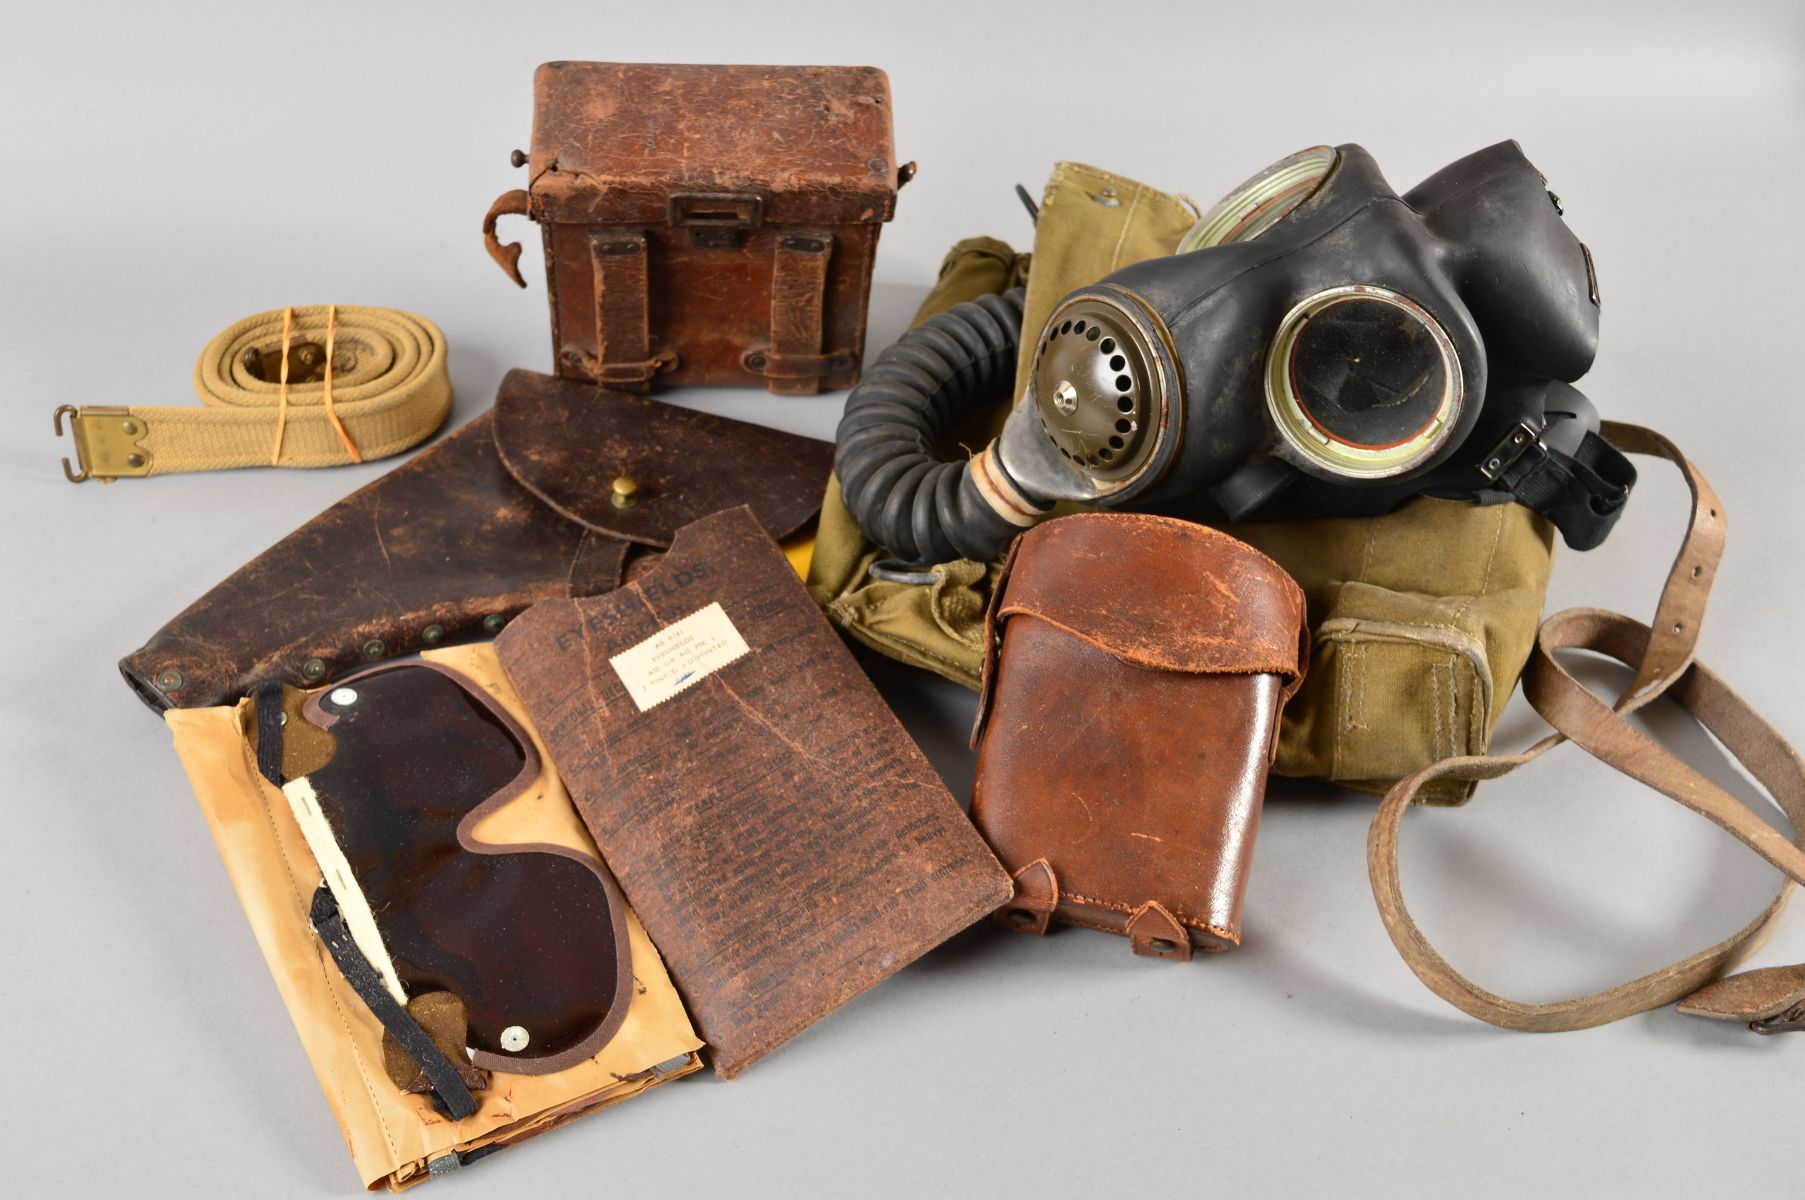 A BOX CONTAINING A WWII ERA BRITISH GAS MASK AND EYE SHIELDS, in green canvas bag, inside the